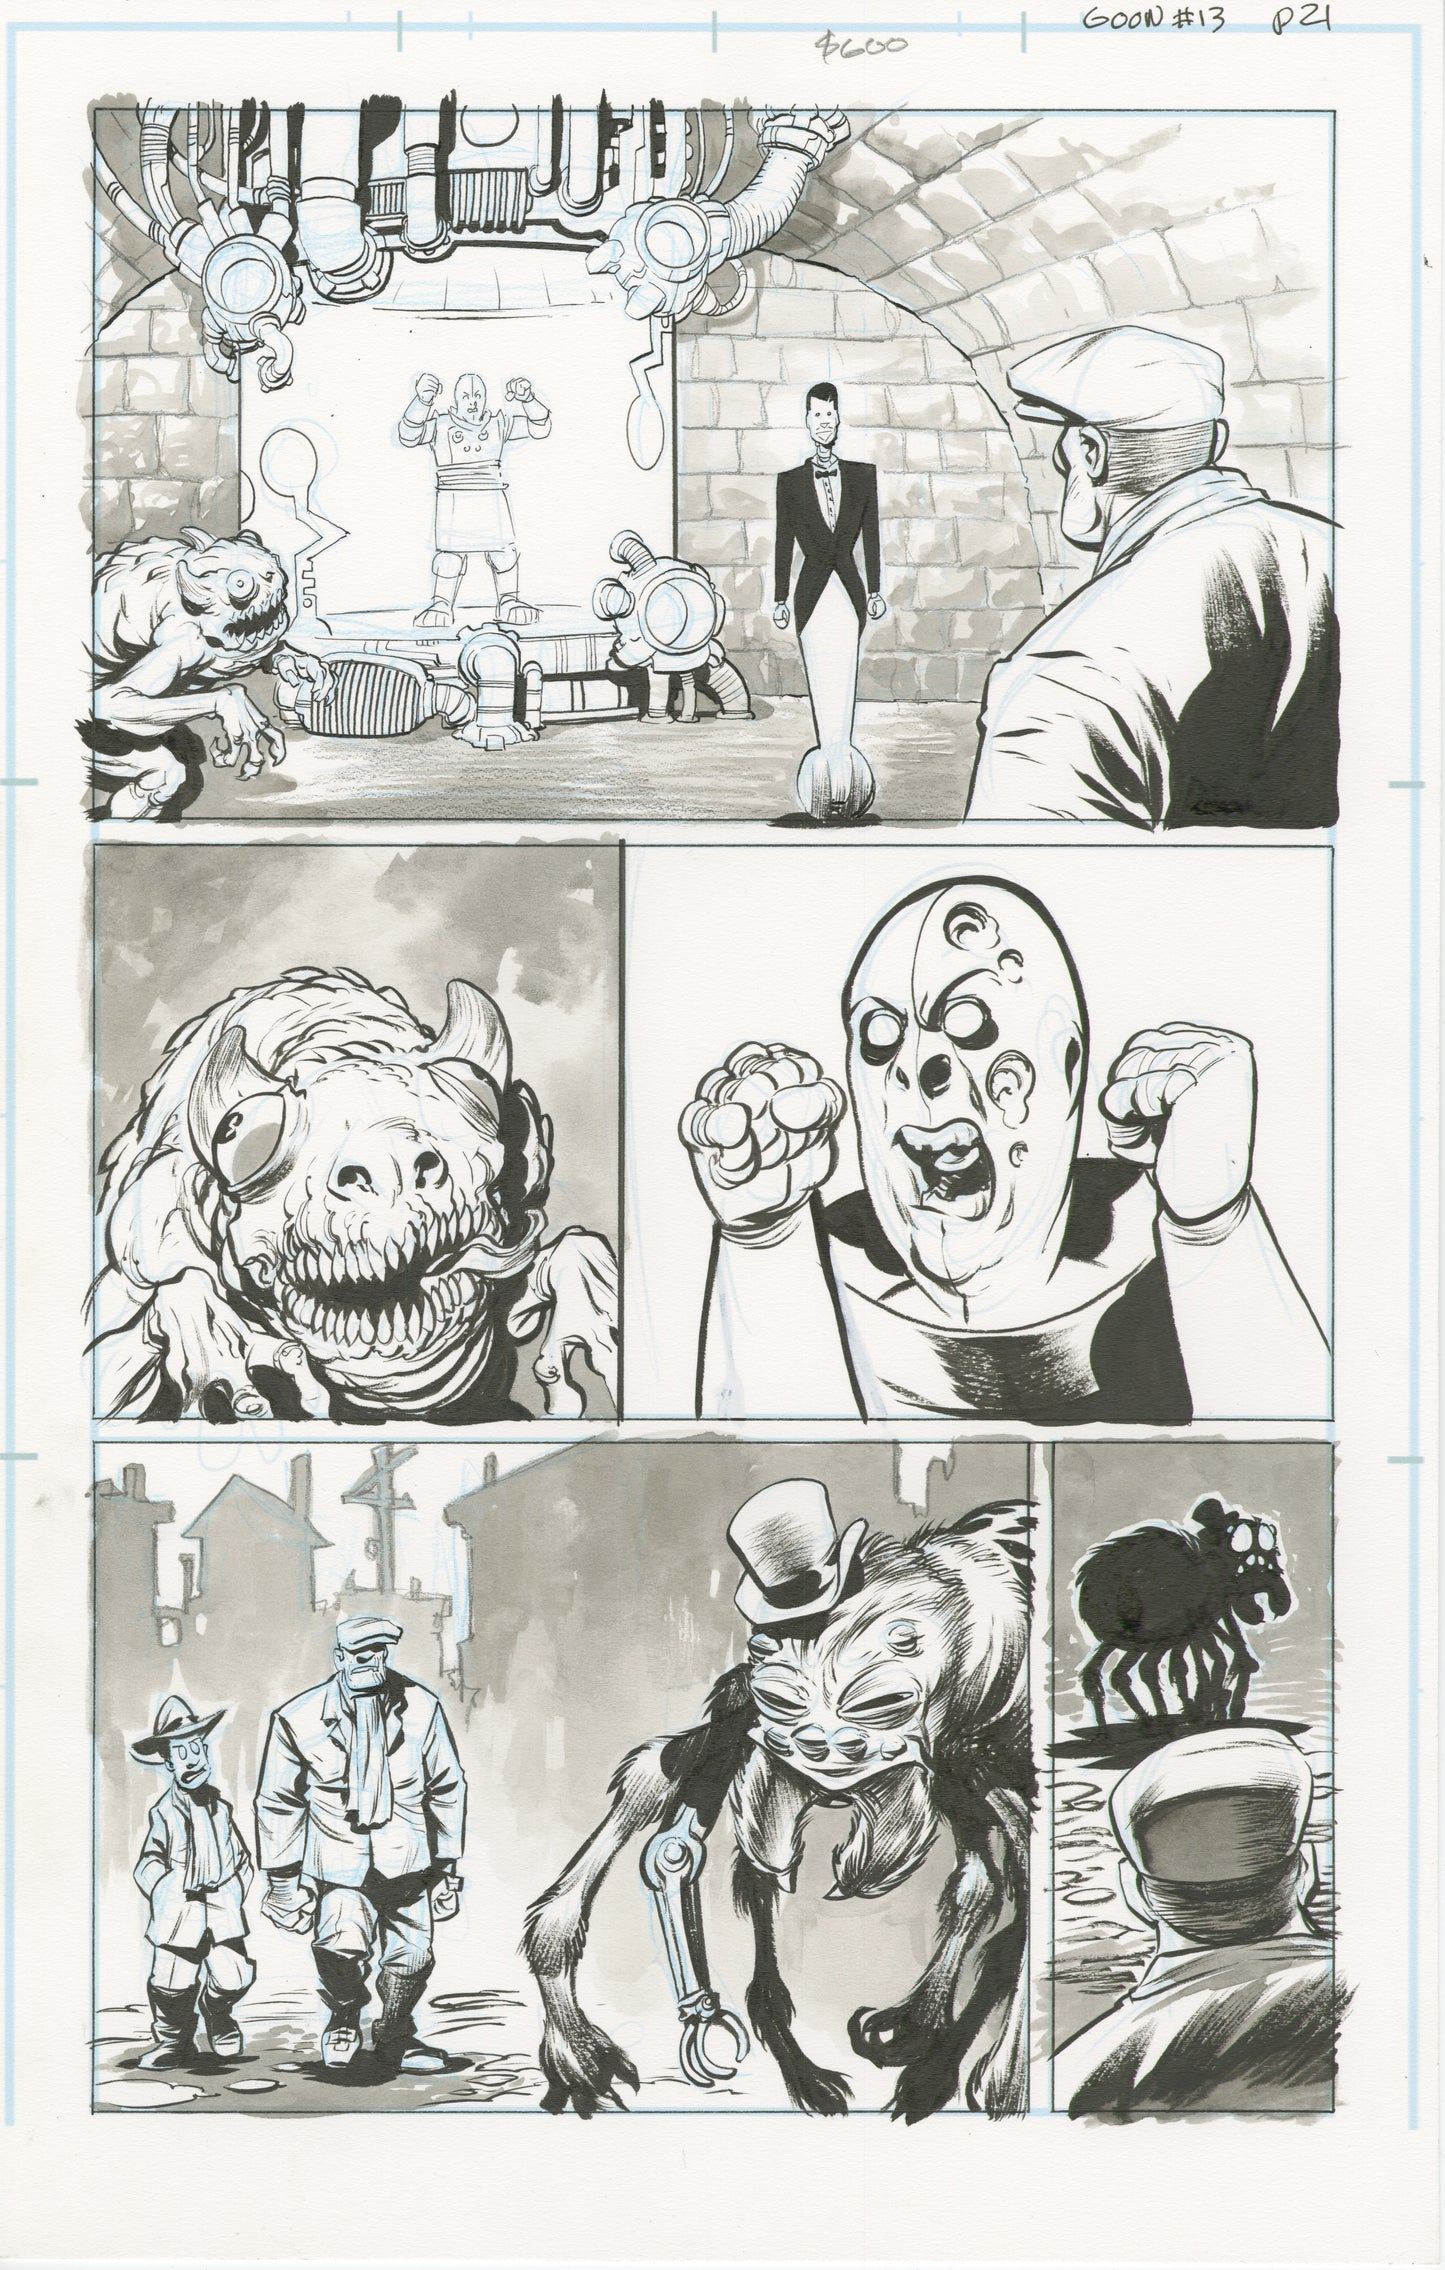 The Goon #13, page #21